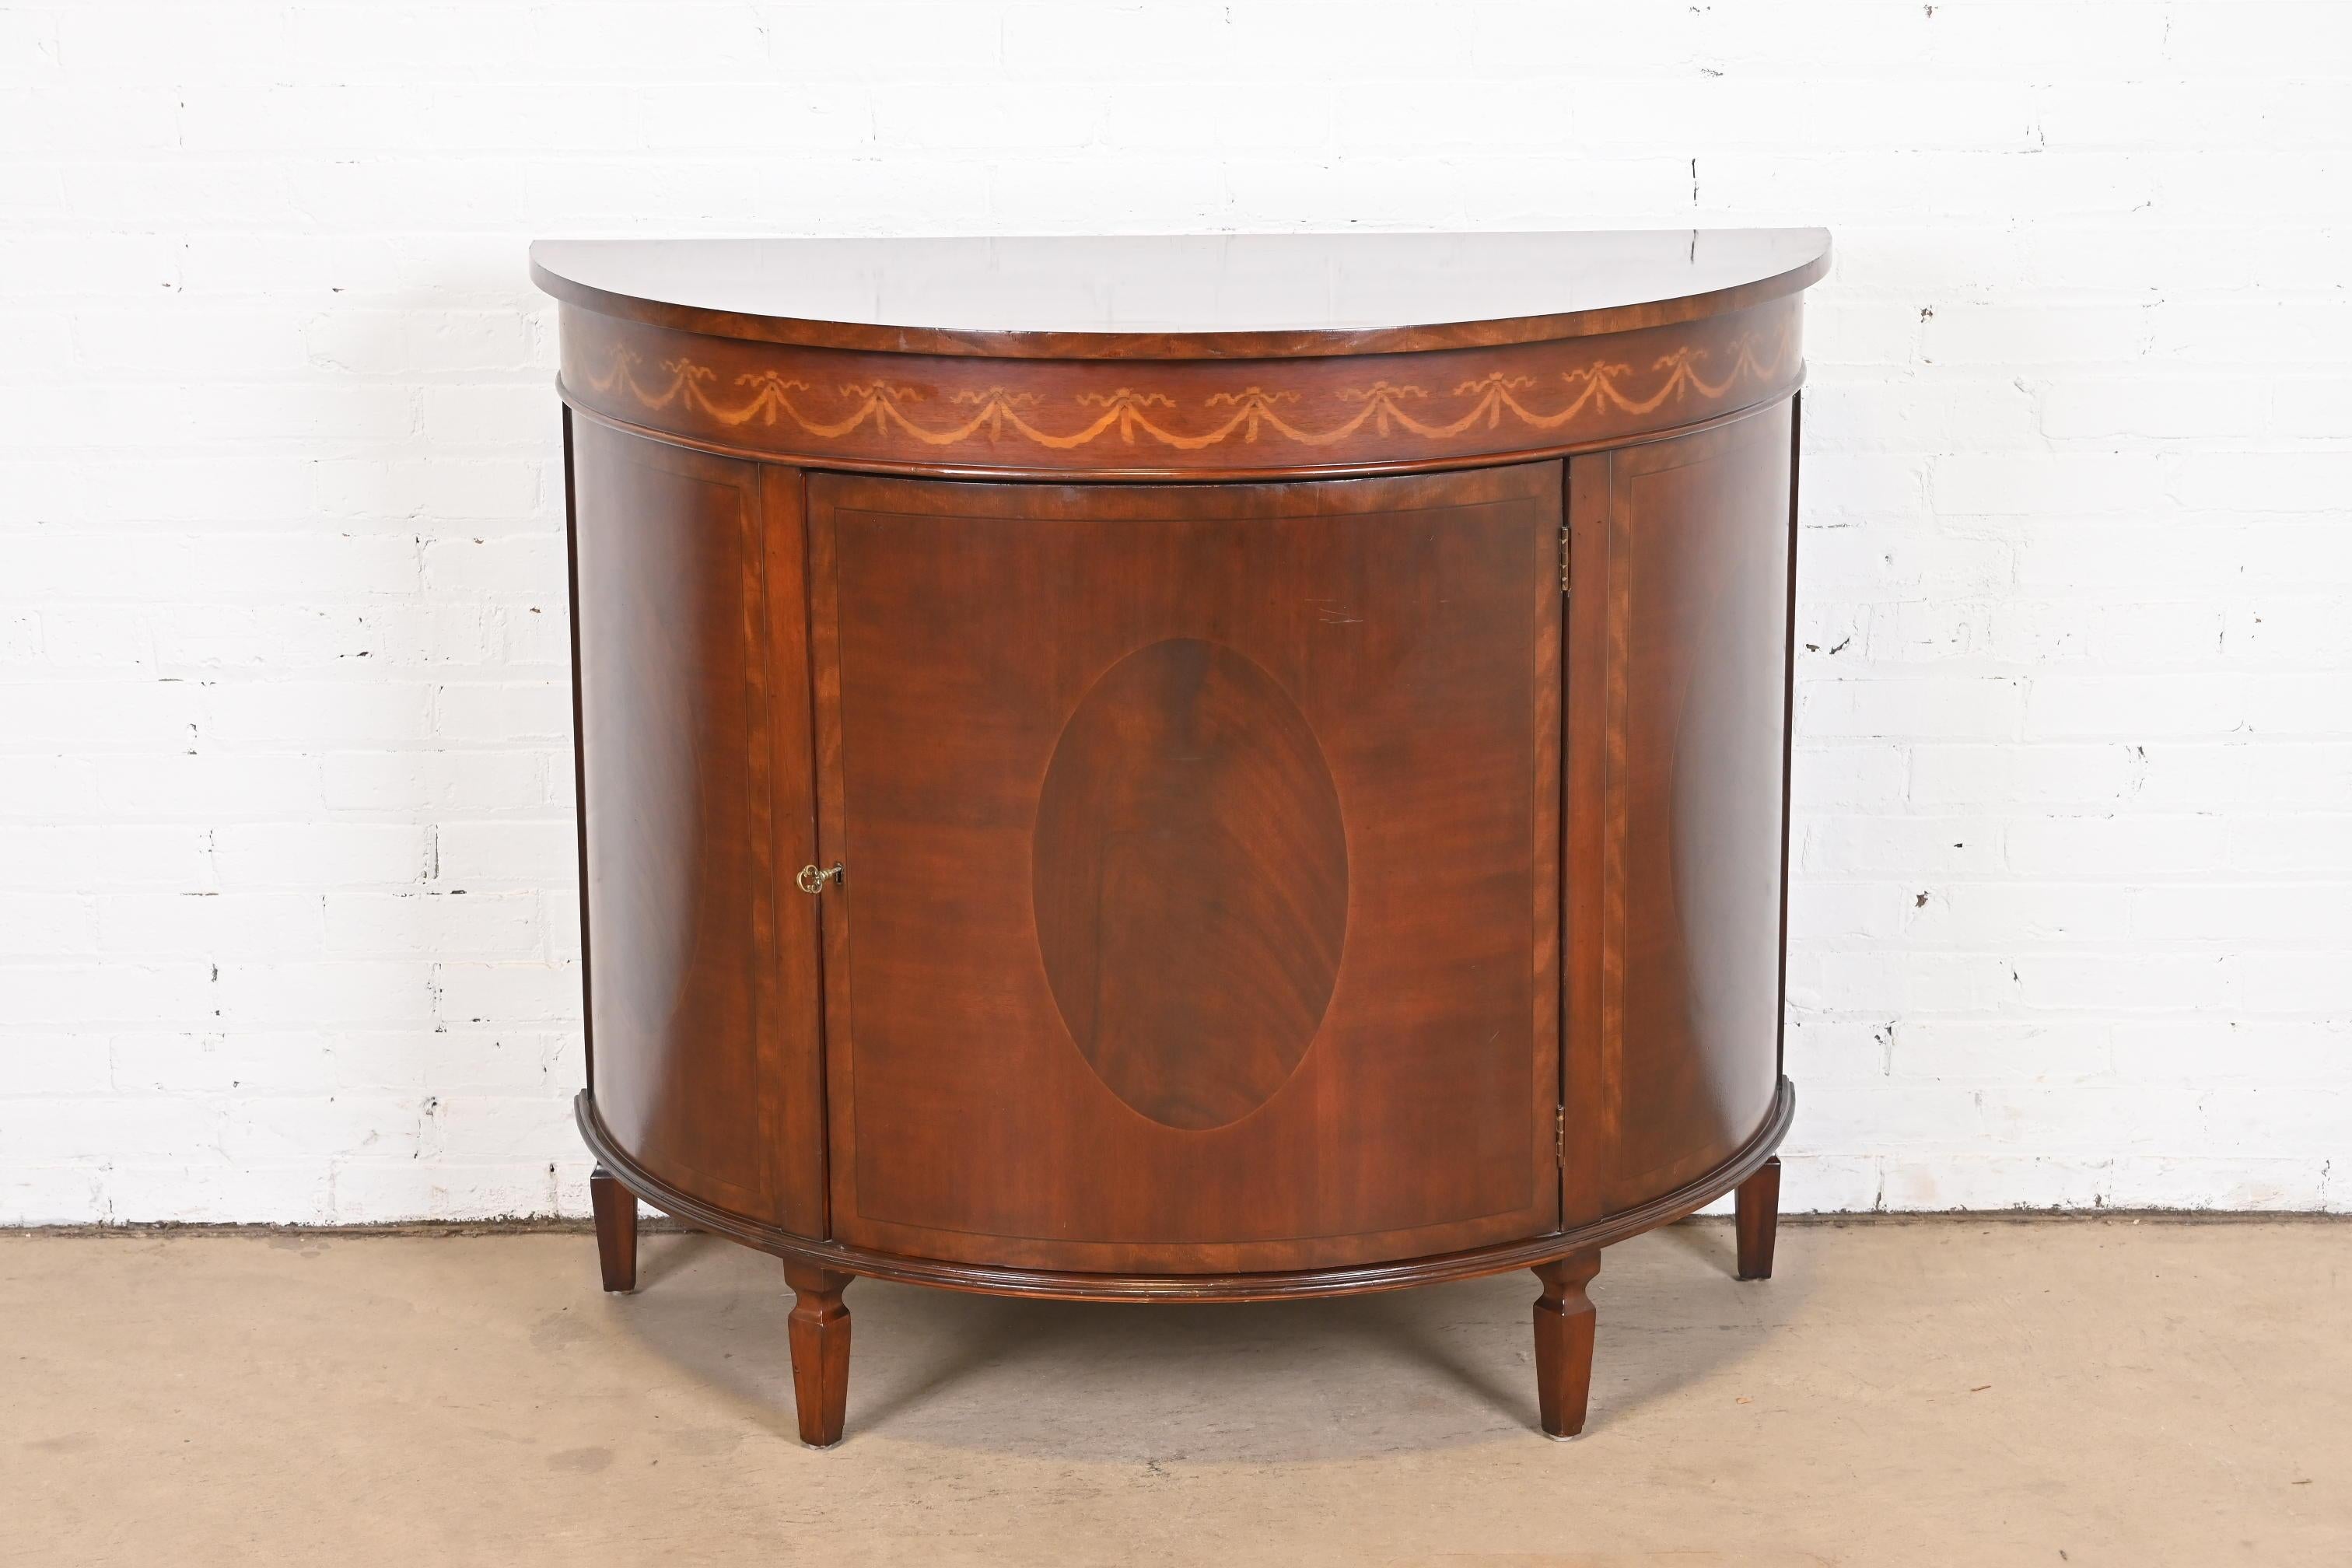 A gorgeous English Georgian or Federal style demilune sideboard, bar cabinet, or console table

In the manner of Baker Furniture 